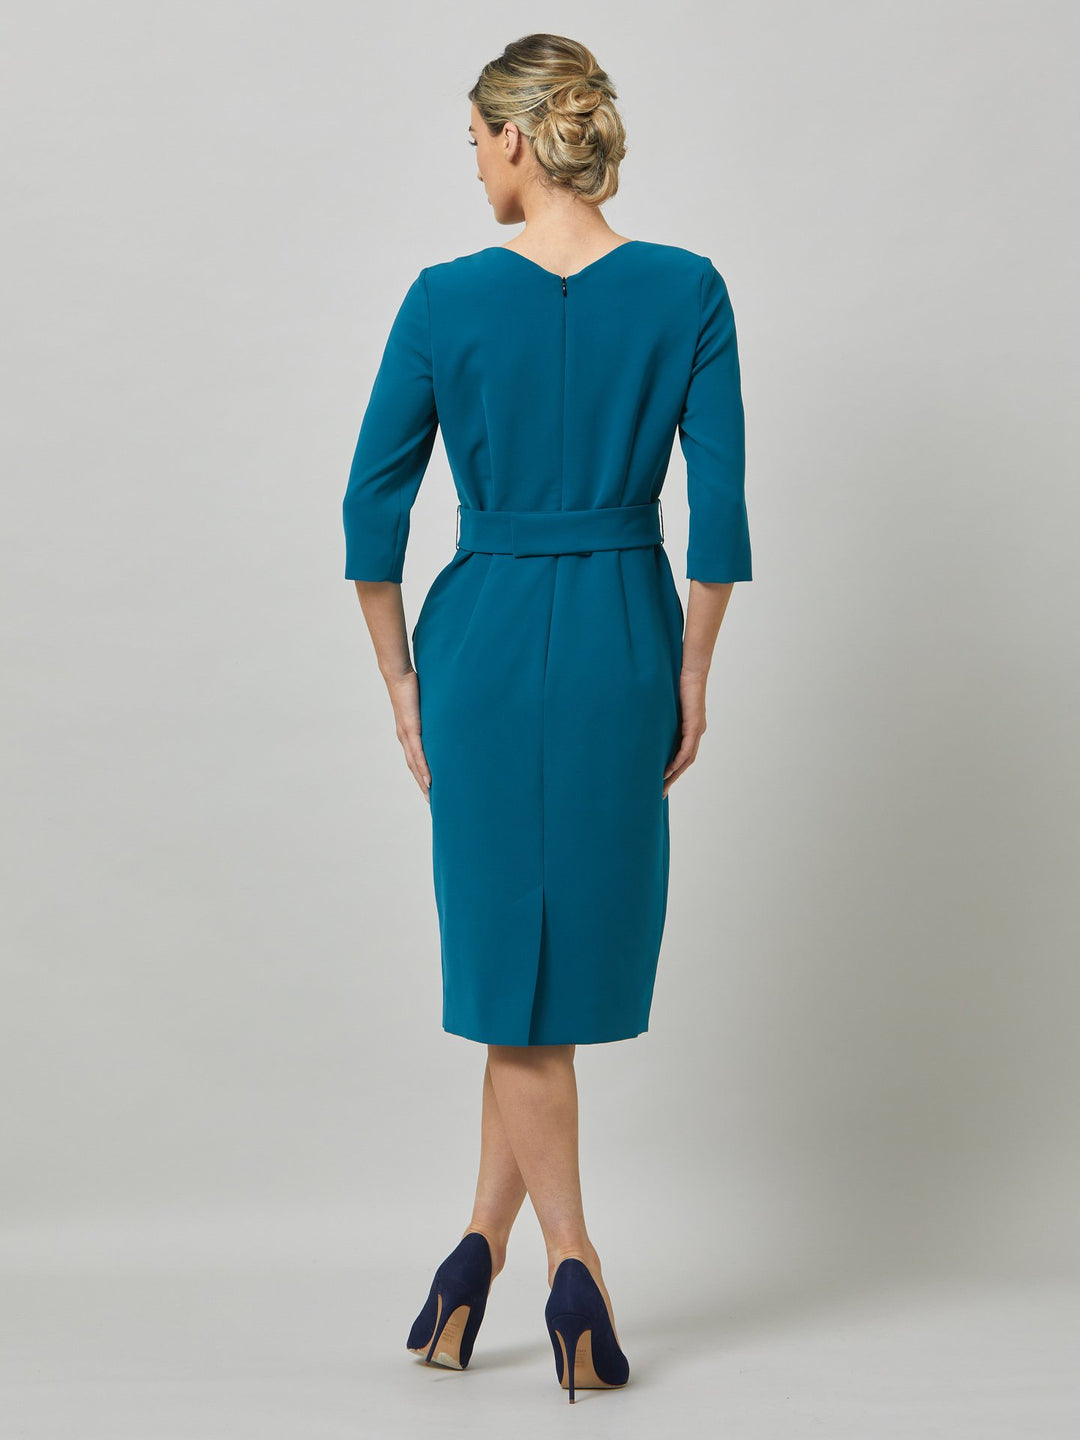 Nina is a fresh take on one of our key silhouettes. Note the softly pleated neckline and the elegant silhouette which hugs the frame around the hips and thighs for a flattering wear. Skirt falls to below the knee, fitted to the waist with handy pockets and detachable belt. Crafted in our signature crepe with a hint of stretch in atlantic teal. the perfect desk to dinner dress.